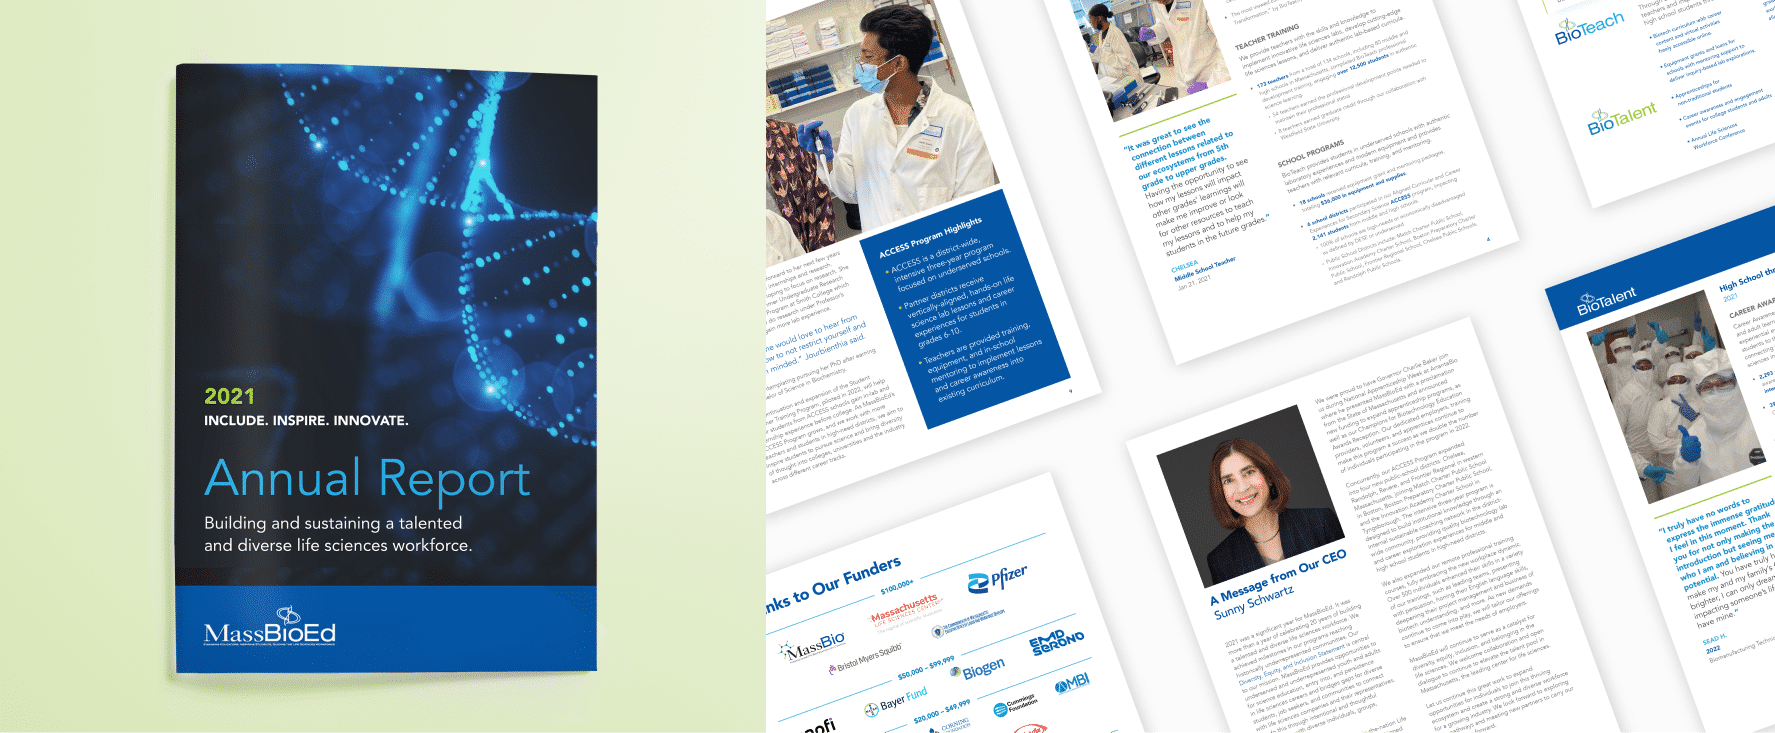 The cover and interior design for an annual report; well-designed and visually appealing.